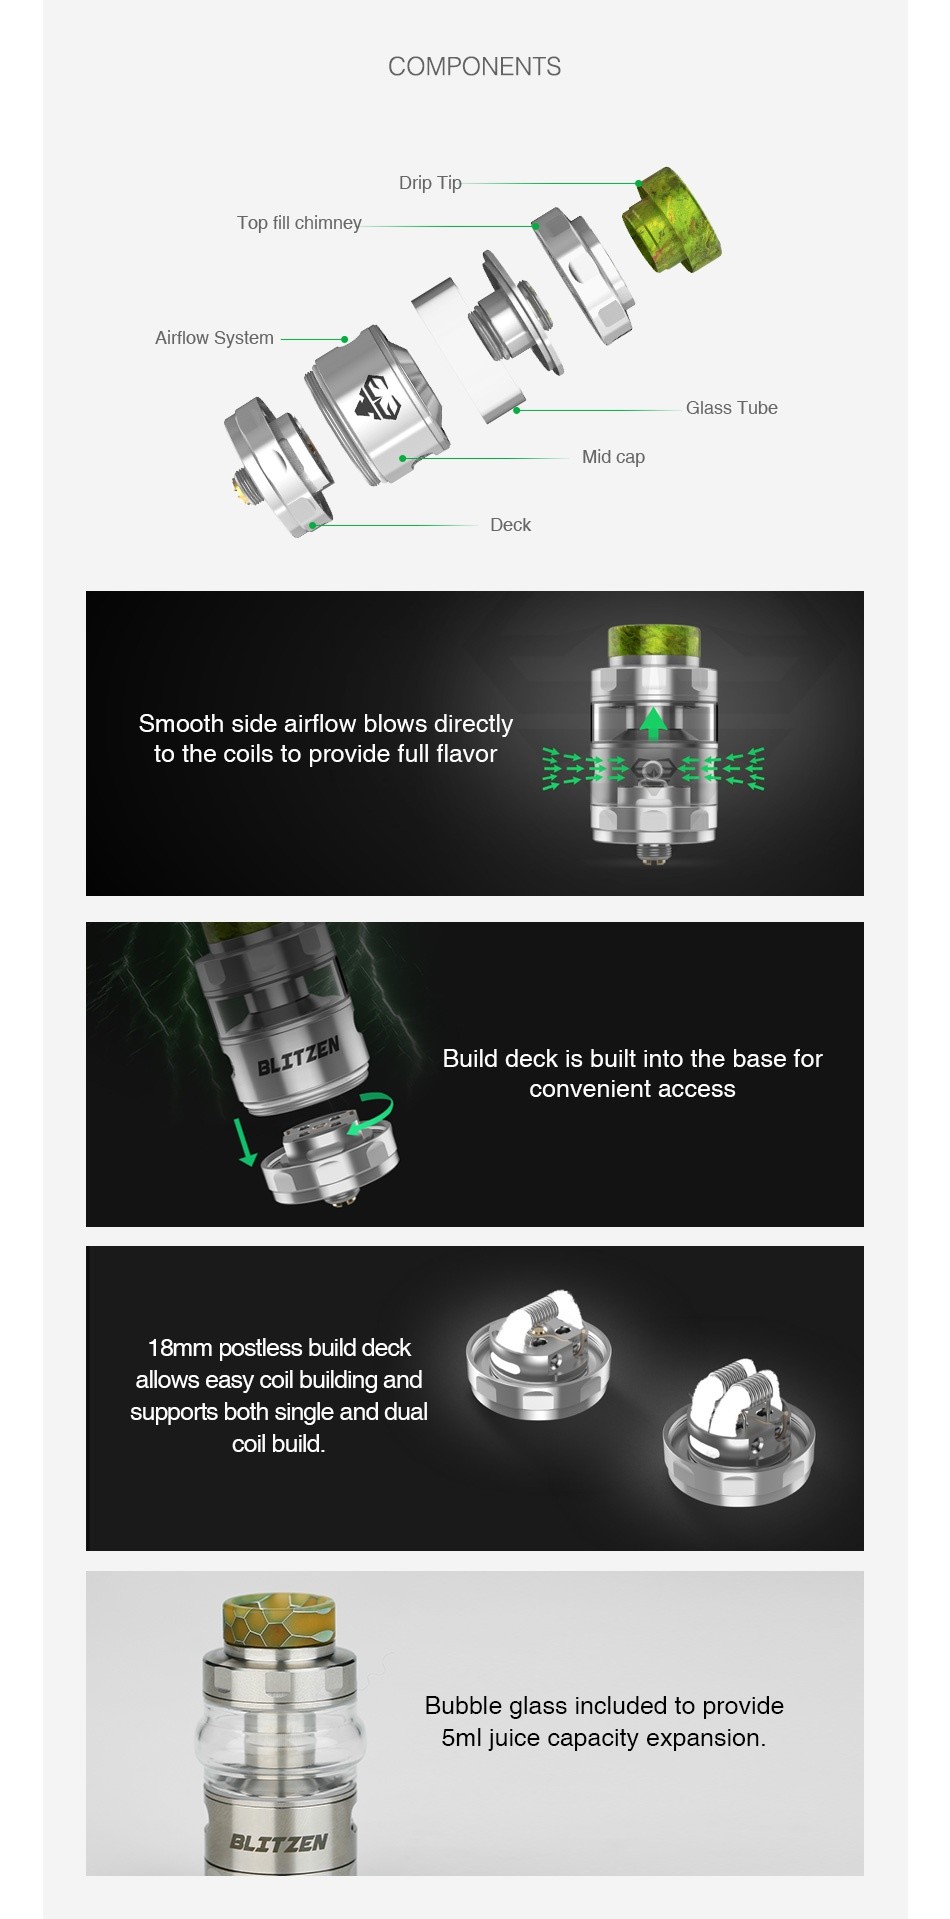 GeekVape Blitzen RTA 2ml/5ml COMPONENTS Drip T Top fill chimney Airflow System Mid cap Deck Smooth side airflow blows directly to the coils to provide full flavor Build deck is built into the base for convenient access 18mm postless build deck allows easy coil building and supports both single and dual coil build Bubble glass included to provide 5ml juice capacity expansion BLITZEN